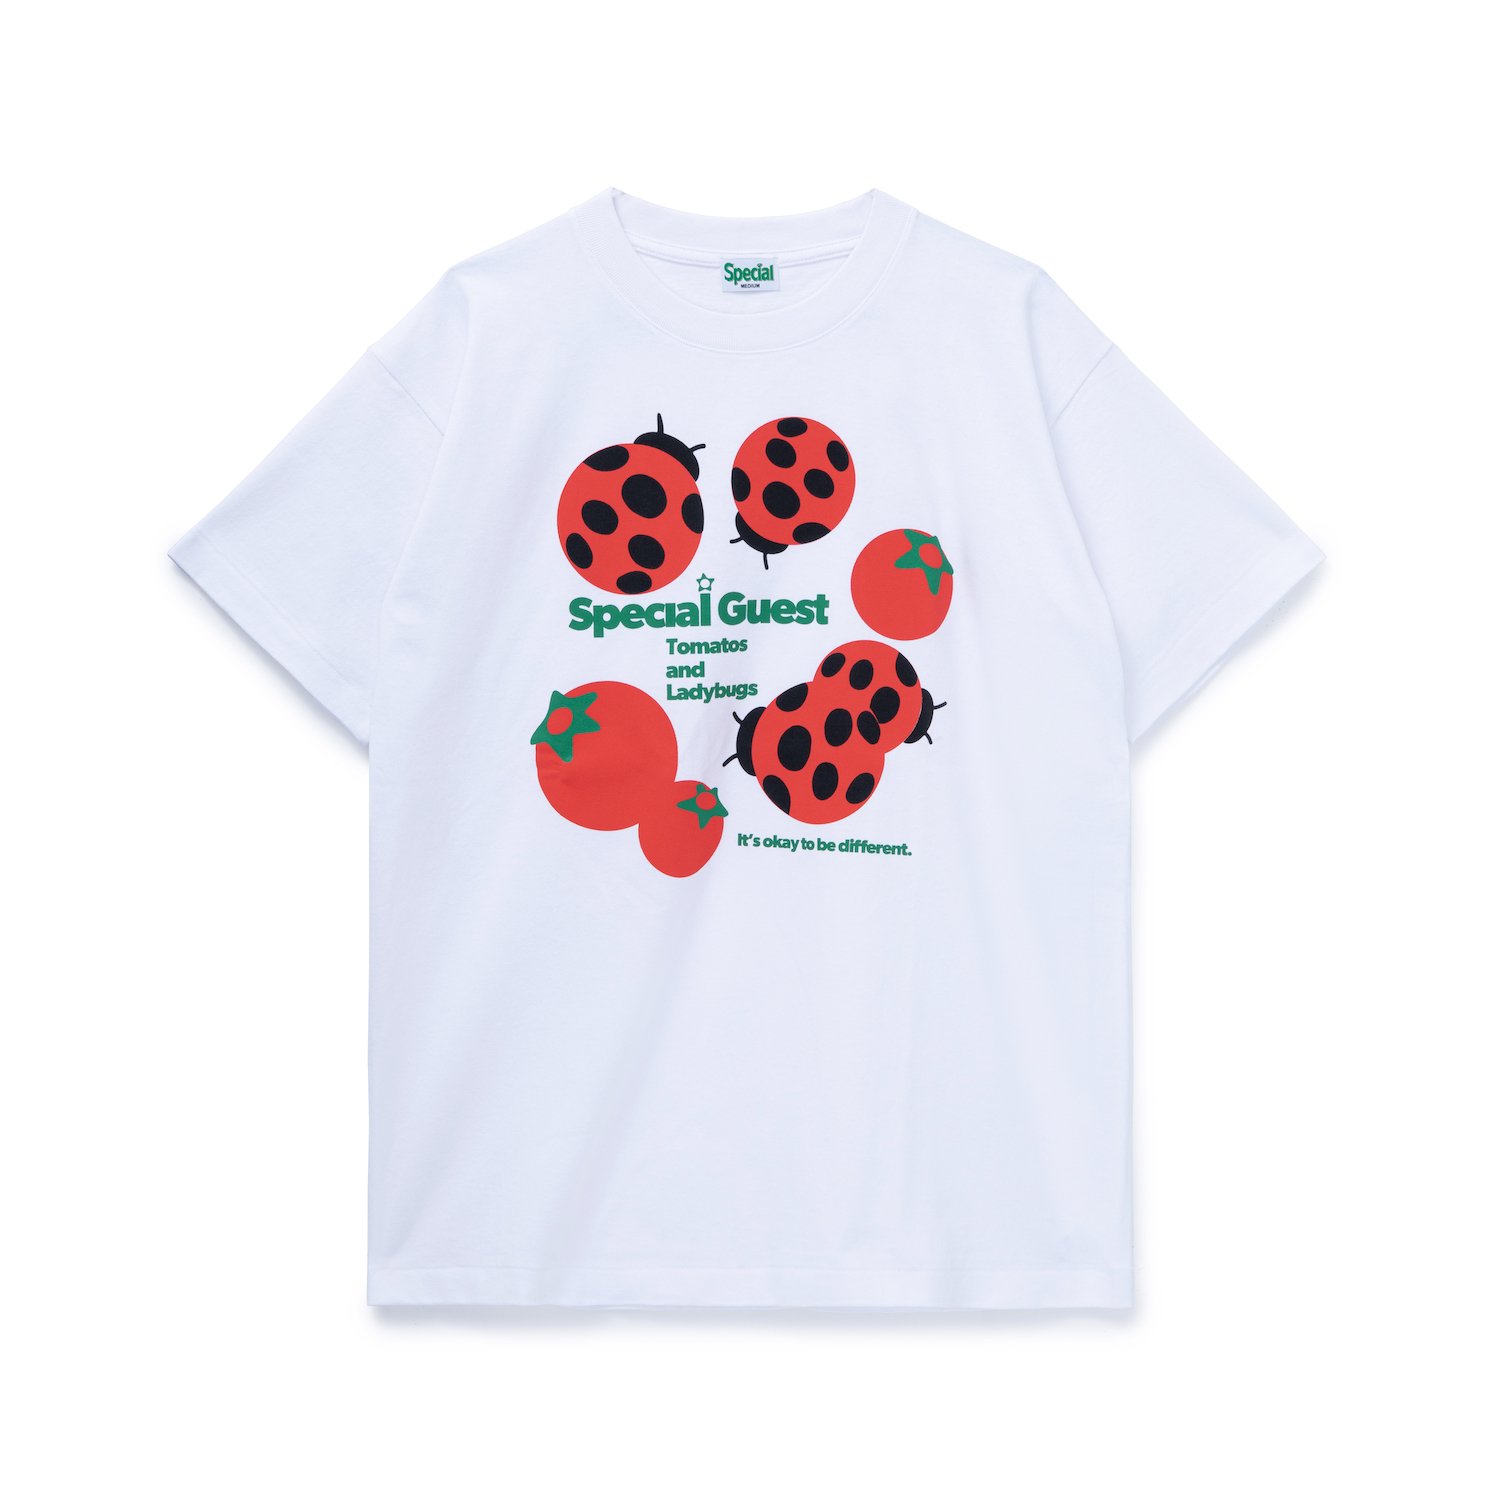 SPECIAL GUEST<br>SG Ladybug Tomato Tee<br>